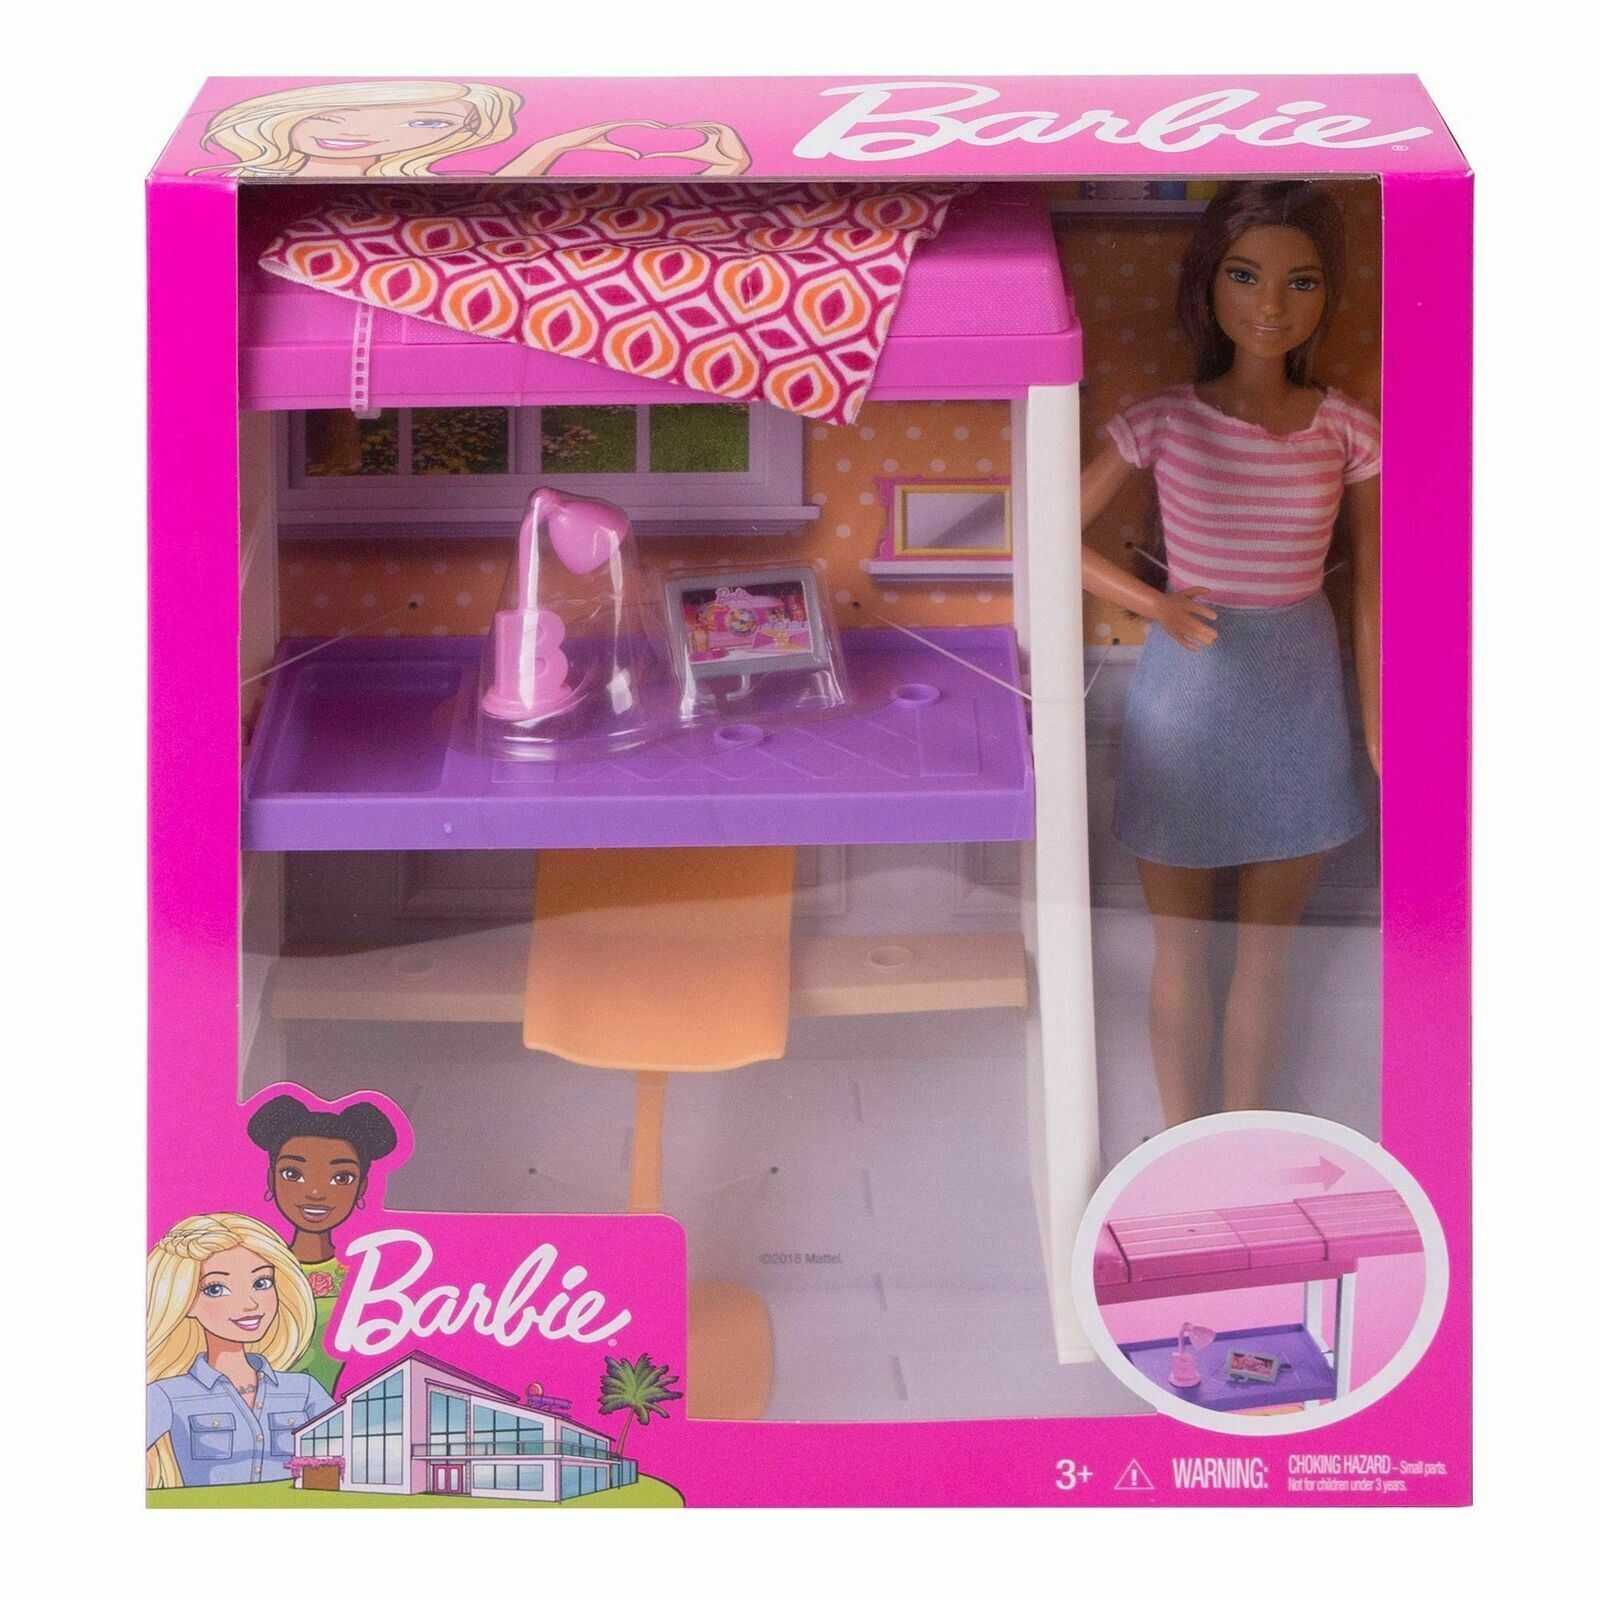 Barbie Doll And Furniture Bedroom Set With Transforming Bunk Beds Desk Acc One Shop Toy Store New Toys For Kids Babies In Pakistan